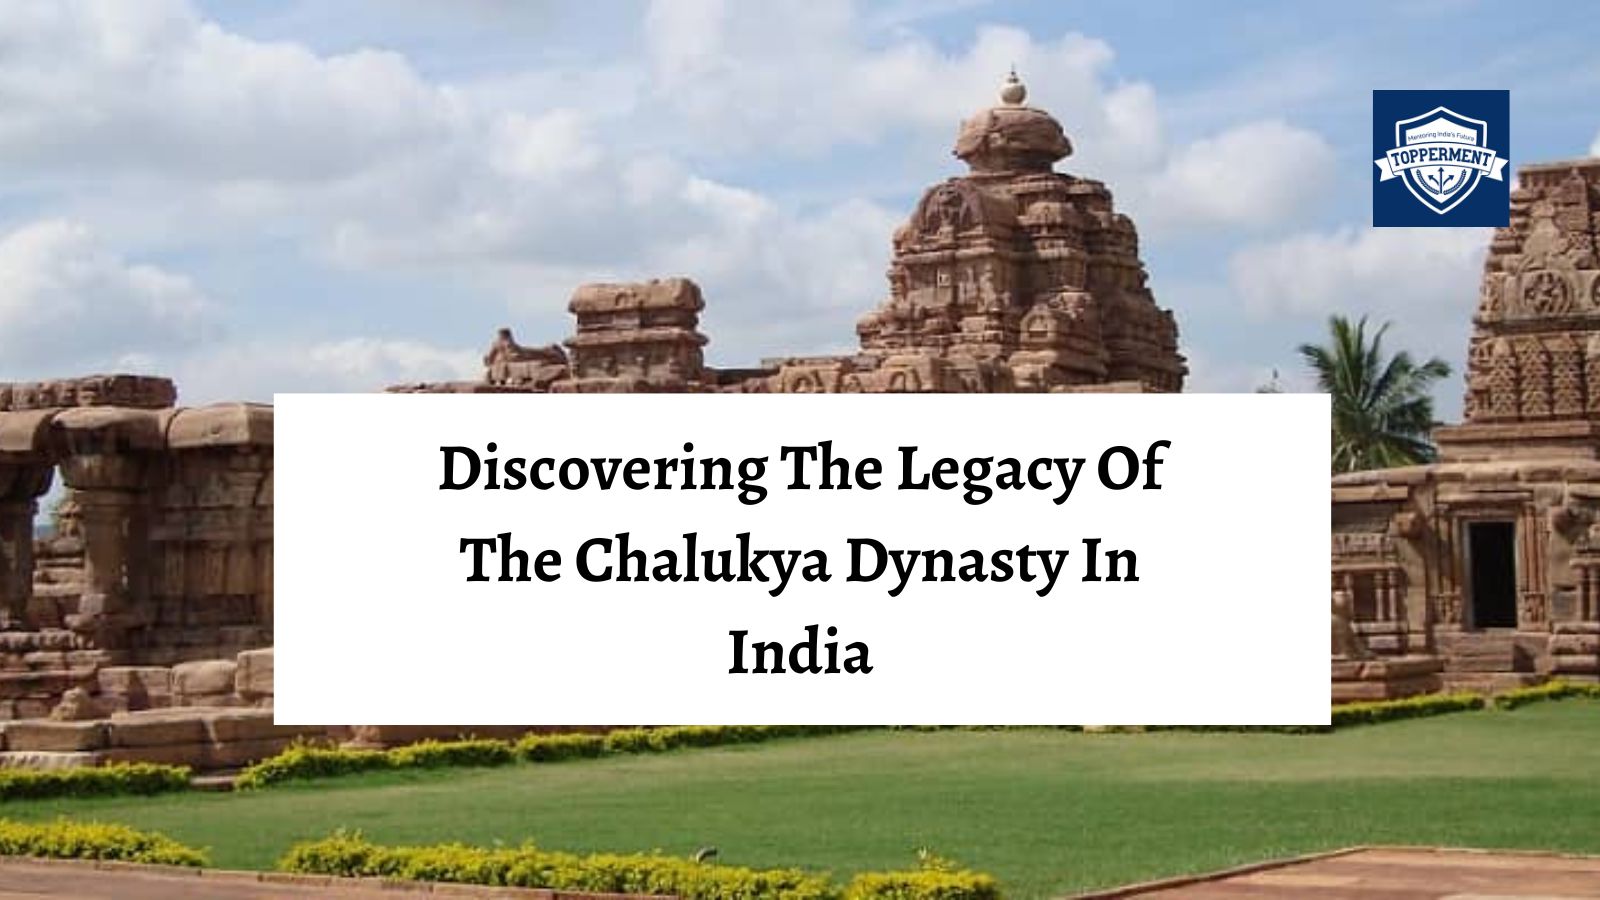 Discovering the Legacy Of The Chalukya Dynasty In India | Best UPSC IAS Coaching For Mentorship and Guidance